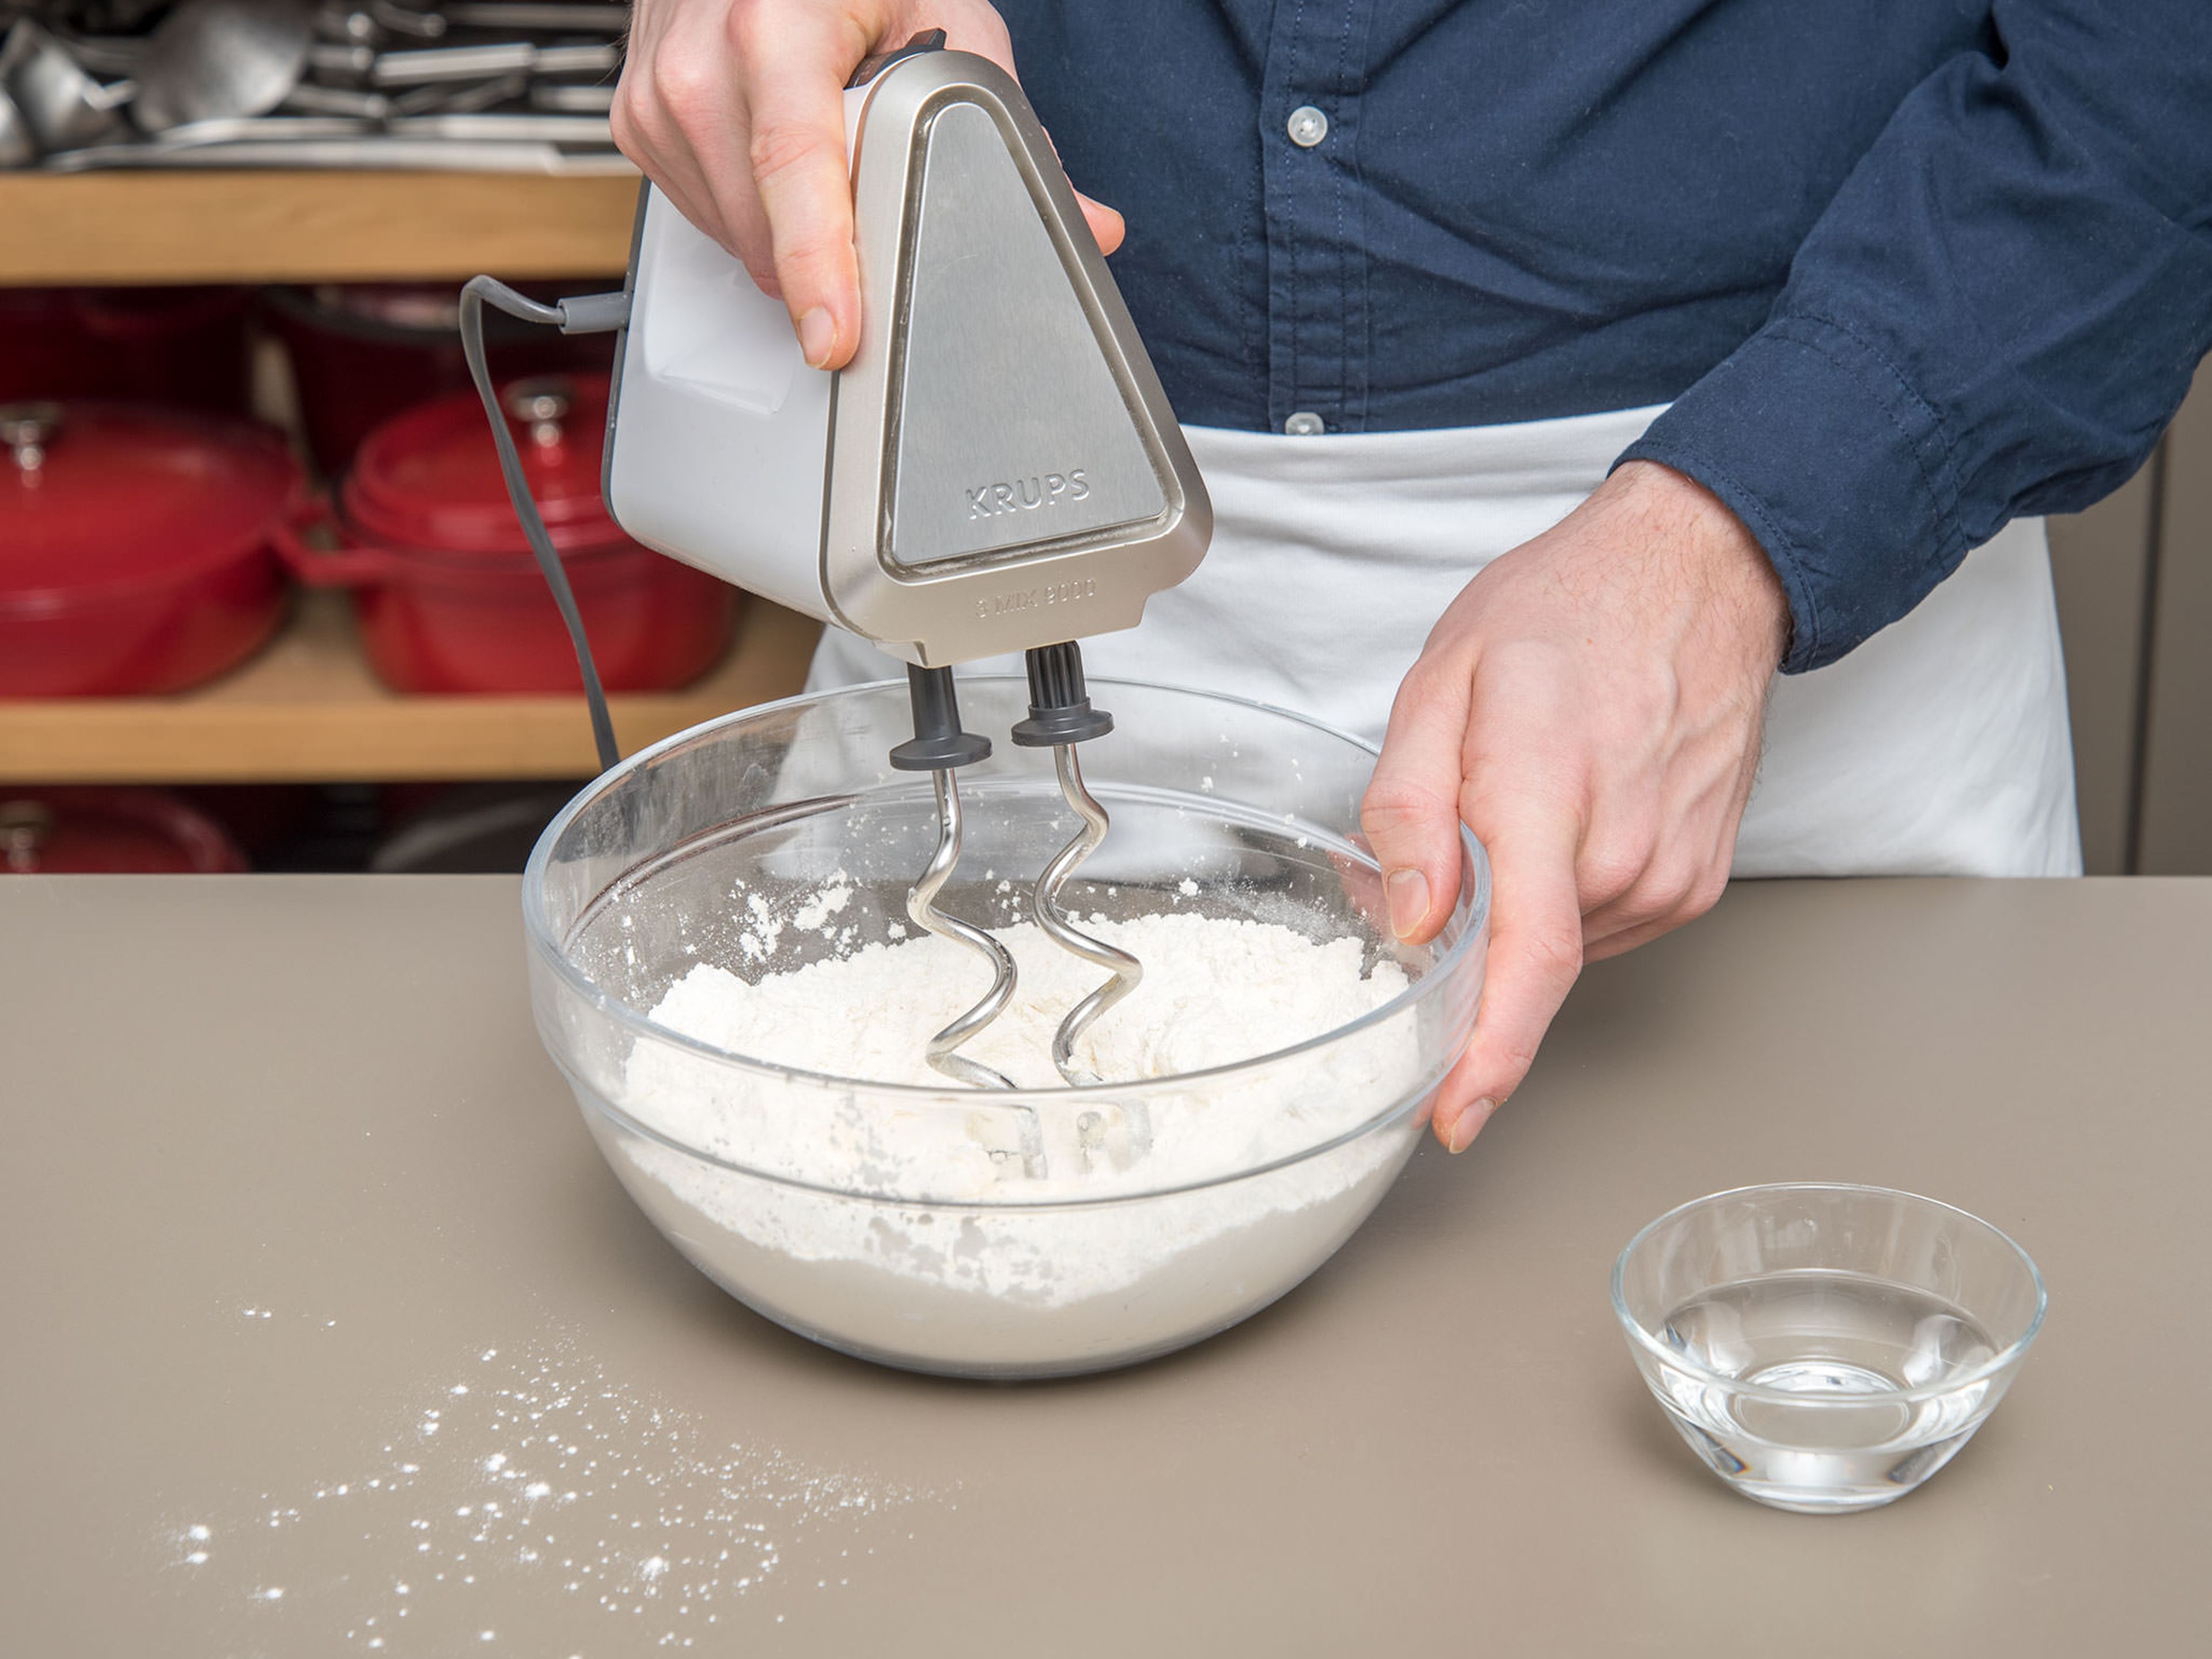 Add flour, salt, sugar, and some of the butter to a bowl and start to knead with a hand mixer with dough hooks. Add water and keep kneading until a soft dough forms. Wrap in plastic wrap and let the dough rest in the fridge until the filling is prepared.